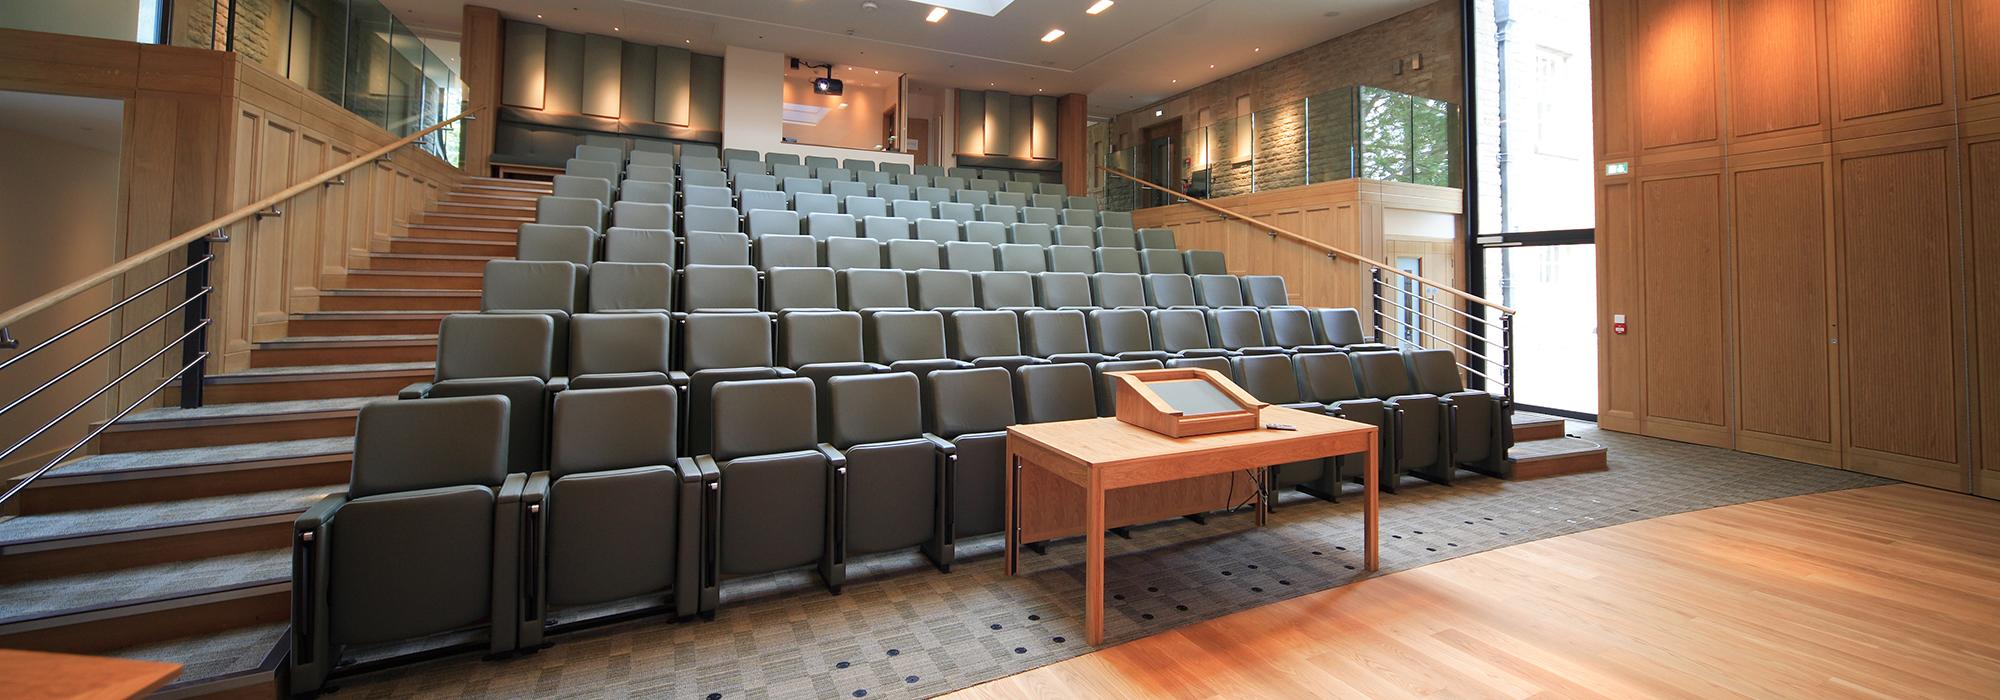 The TS Eliot Lecture Theatre